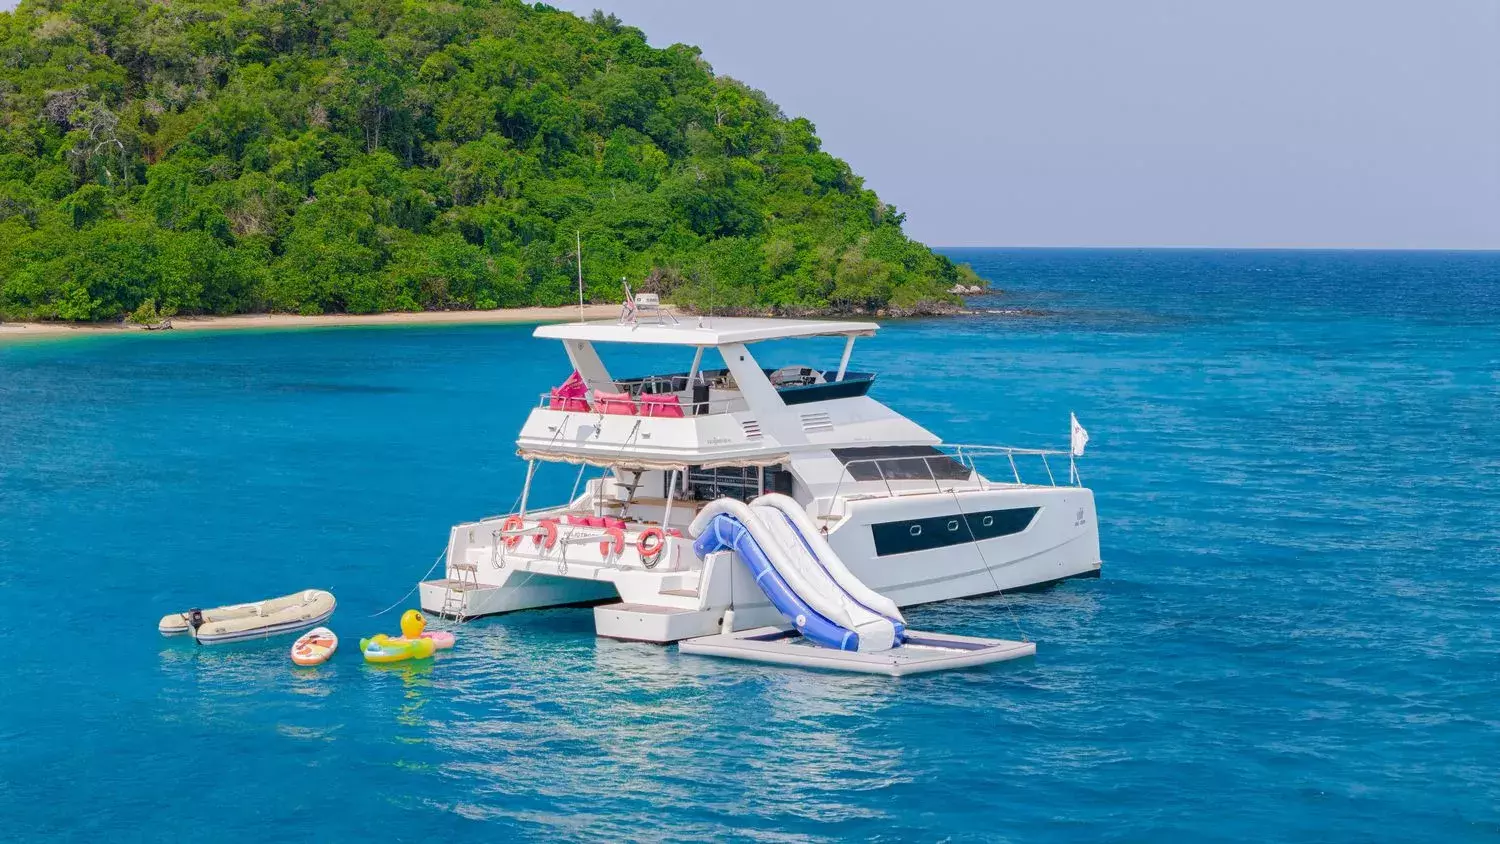 Heliotrope by Bakri Cono - Top rates for a Charter of a private Power Catamaran in Thailand